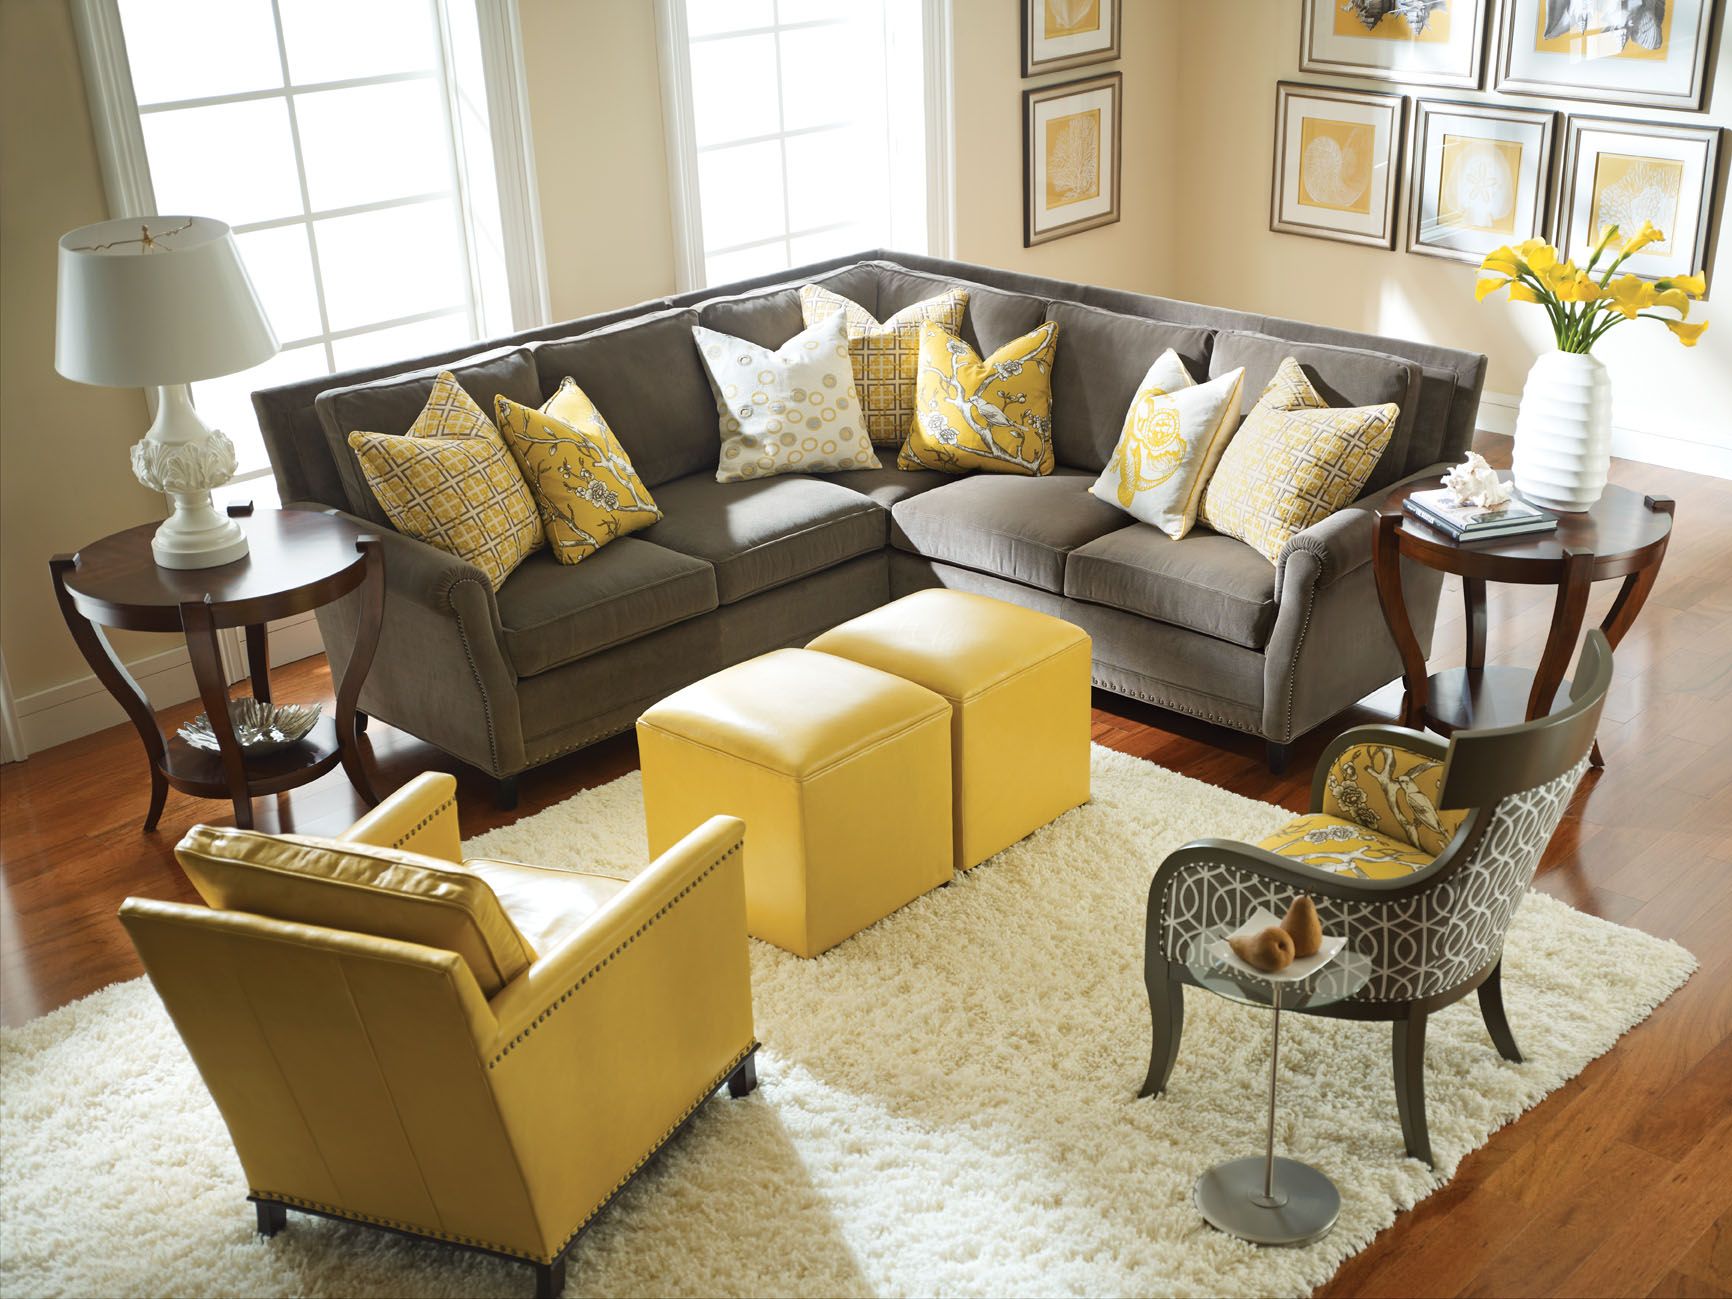 Graceful gray and yellow living room